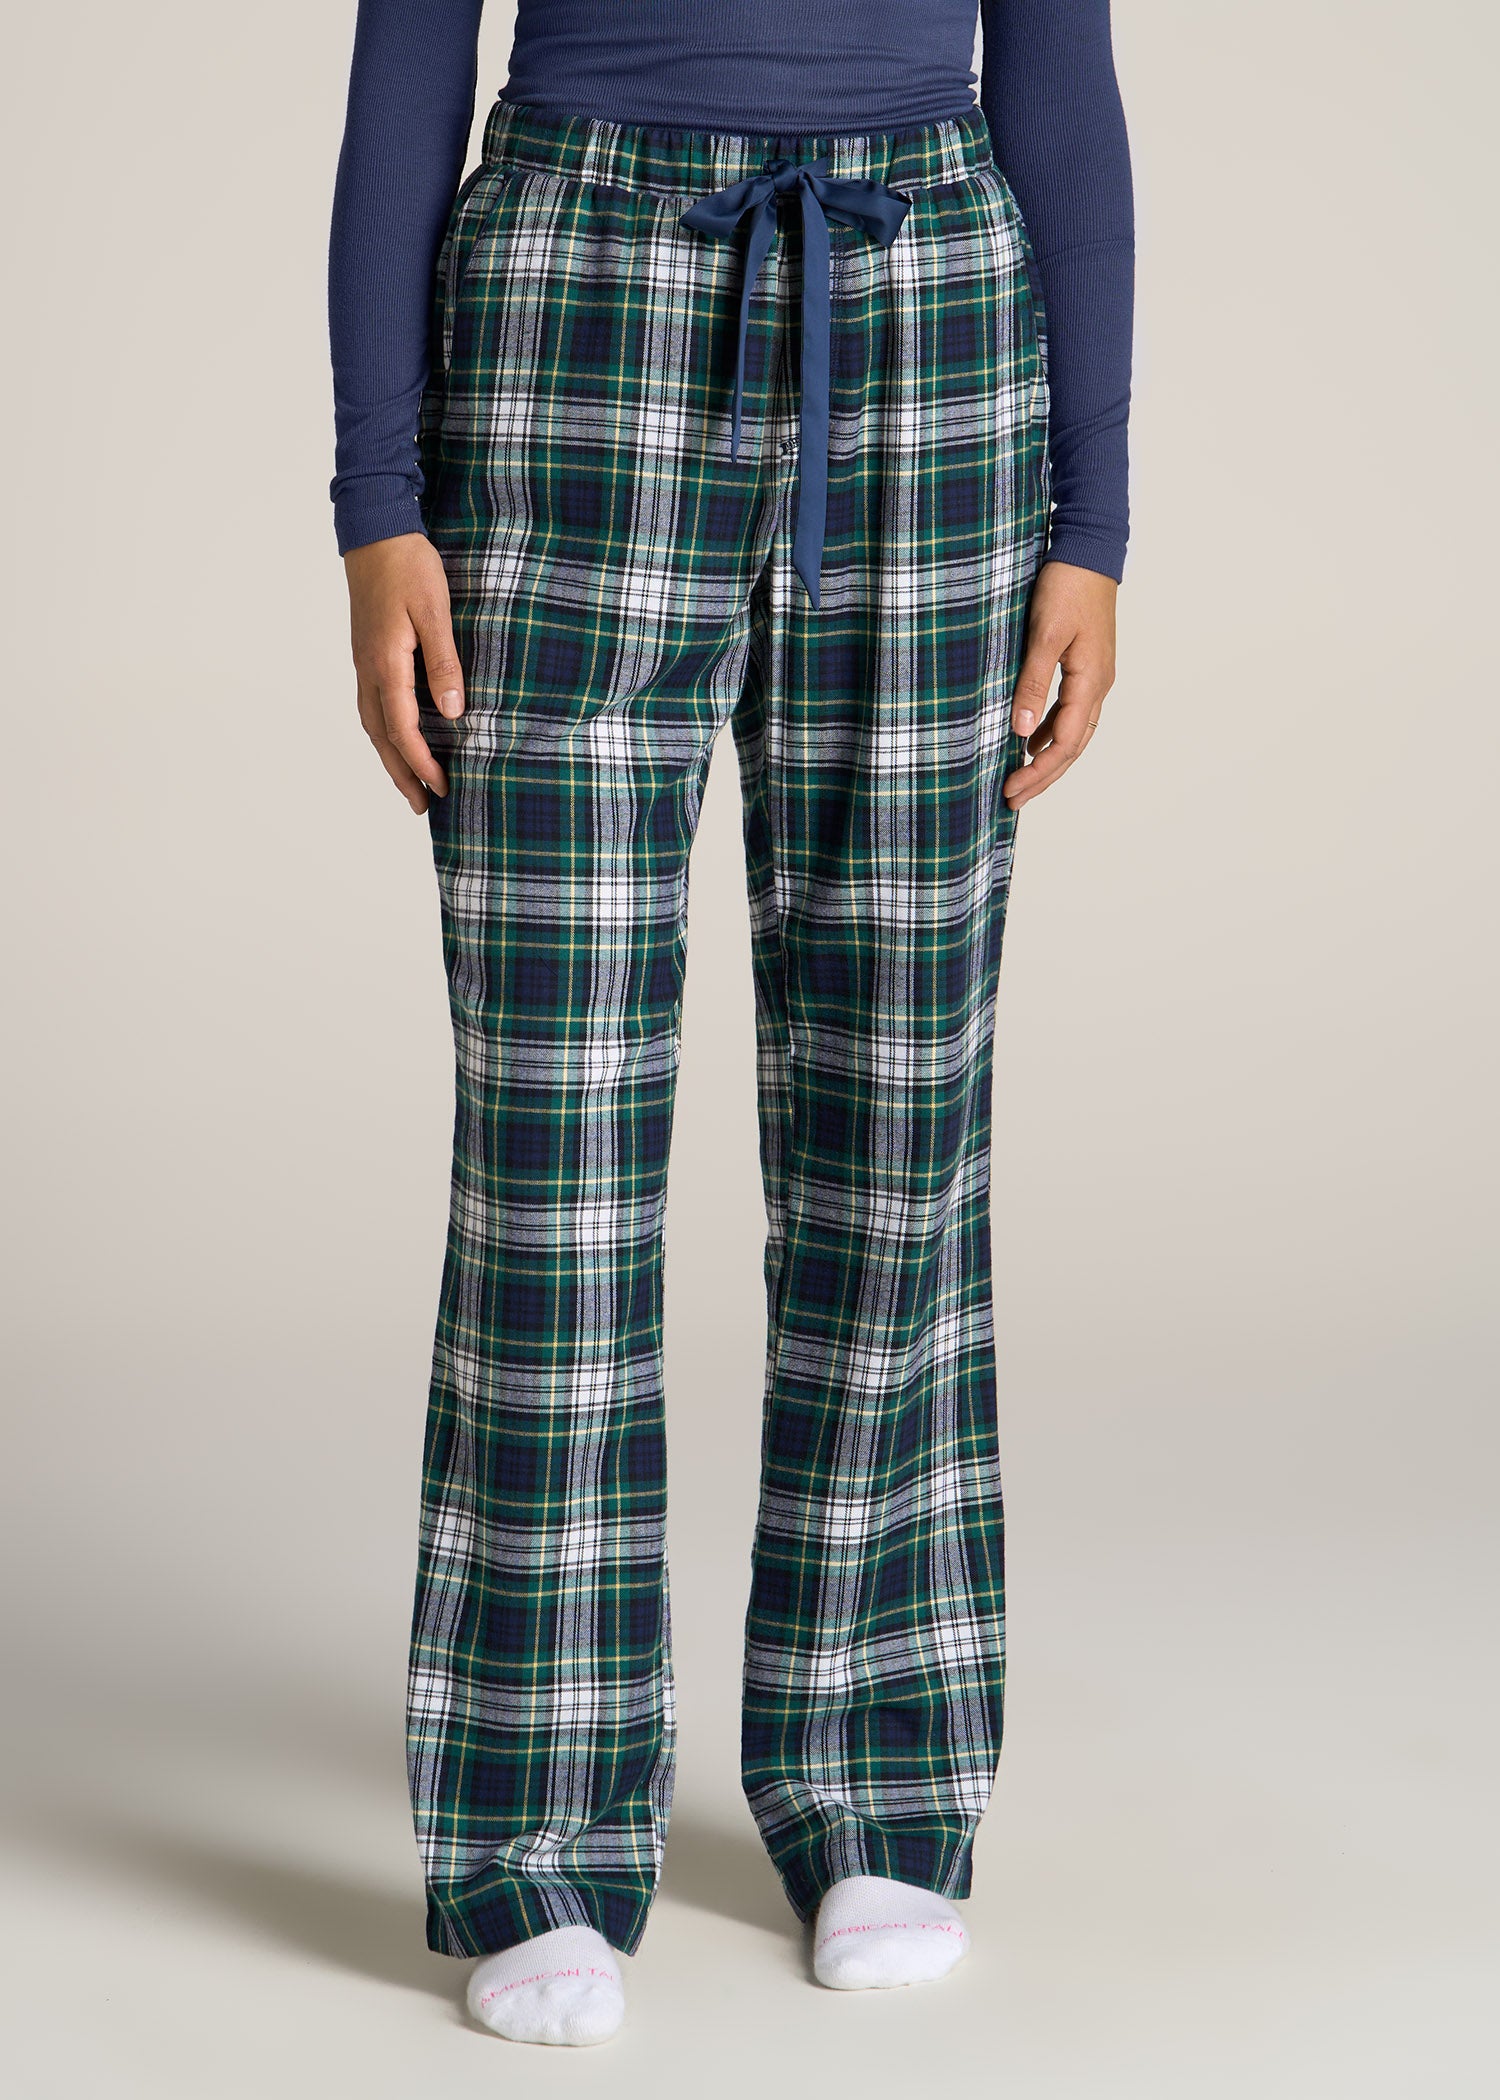 Women's Pajama Pants With Pockets, Women's Soft Flannel Check